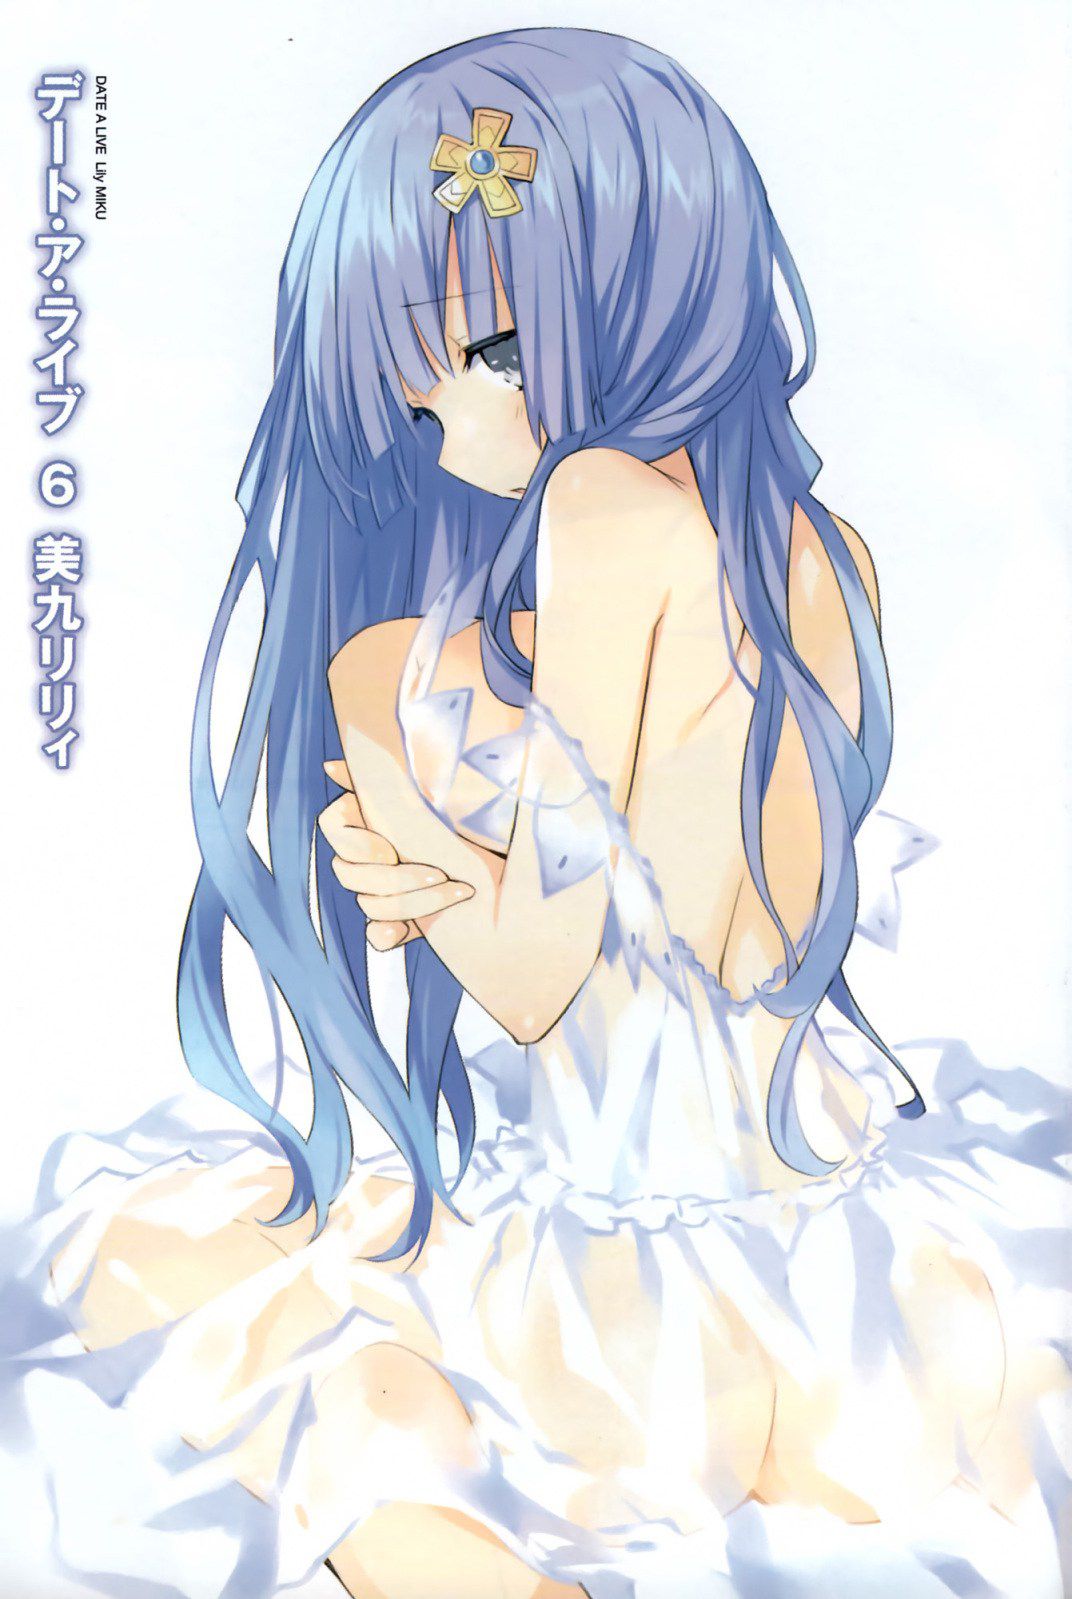 【 Date a live 】 Izayoi-chan photo gallery 22